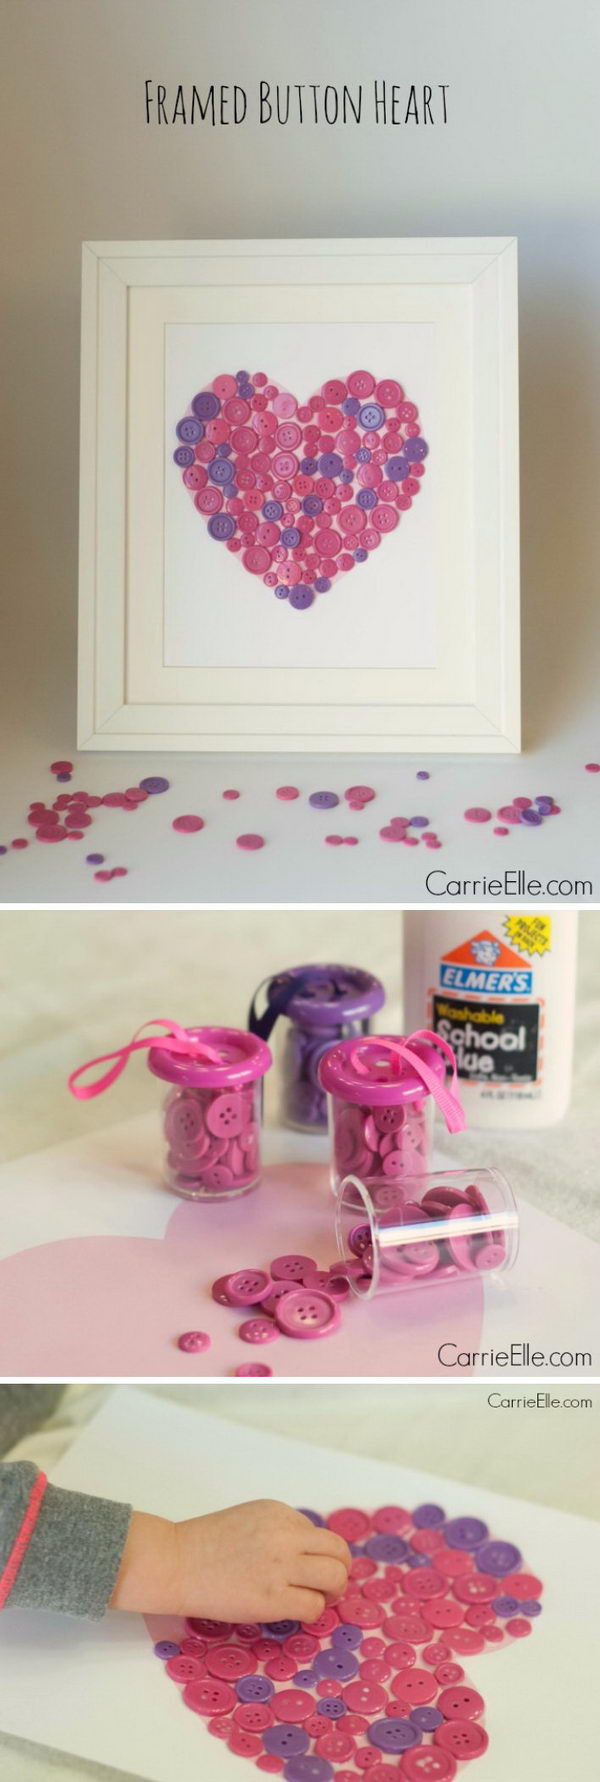 Creatives Ideas For Valentines Day
 15 Creative Valentine s Day Ideas for Kids 2017